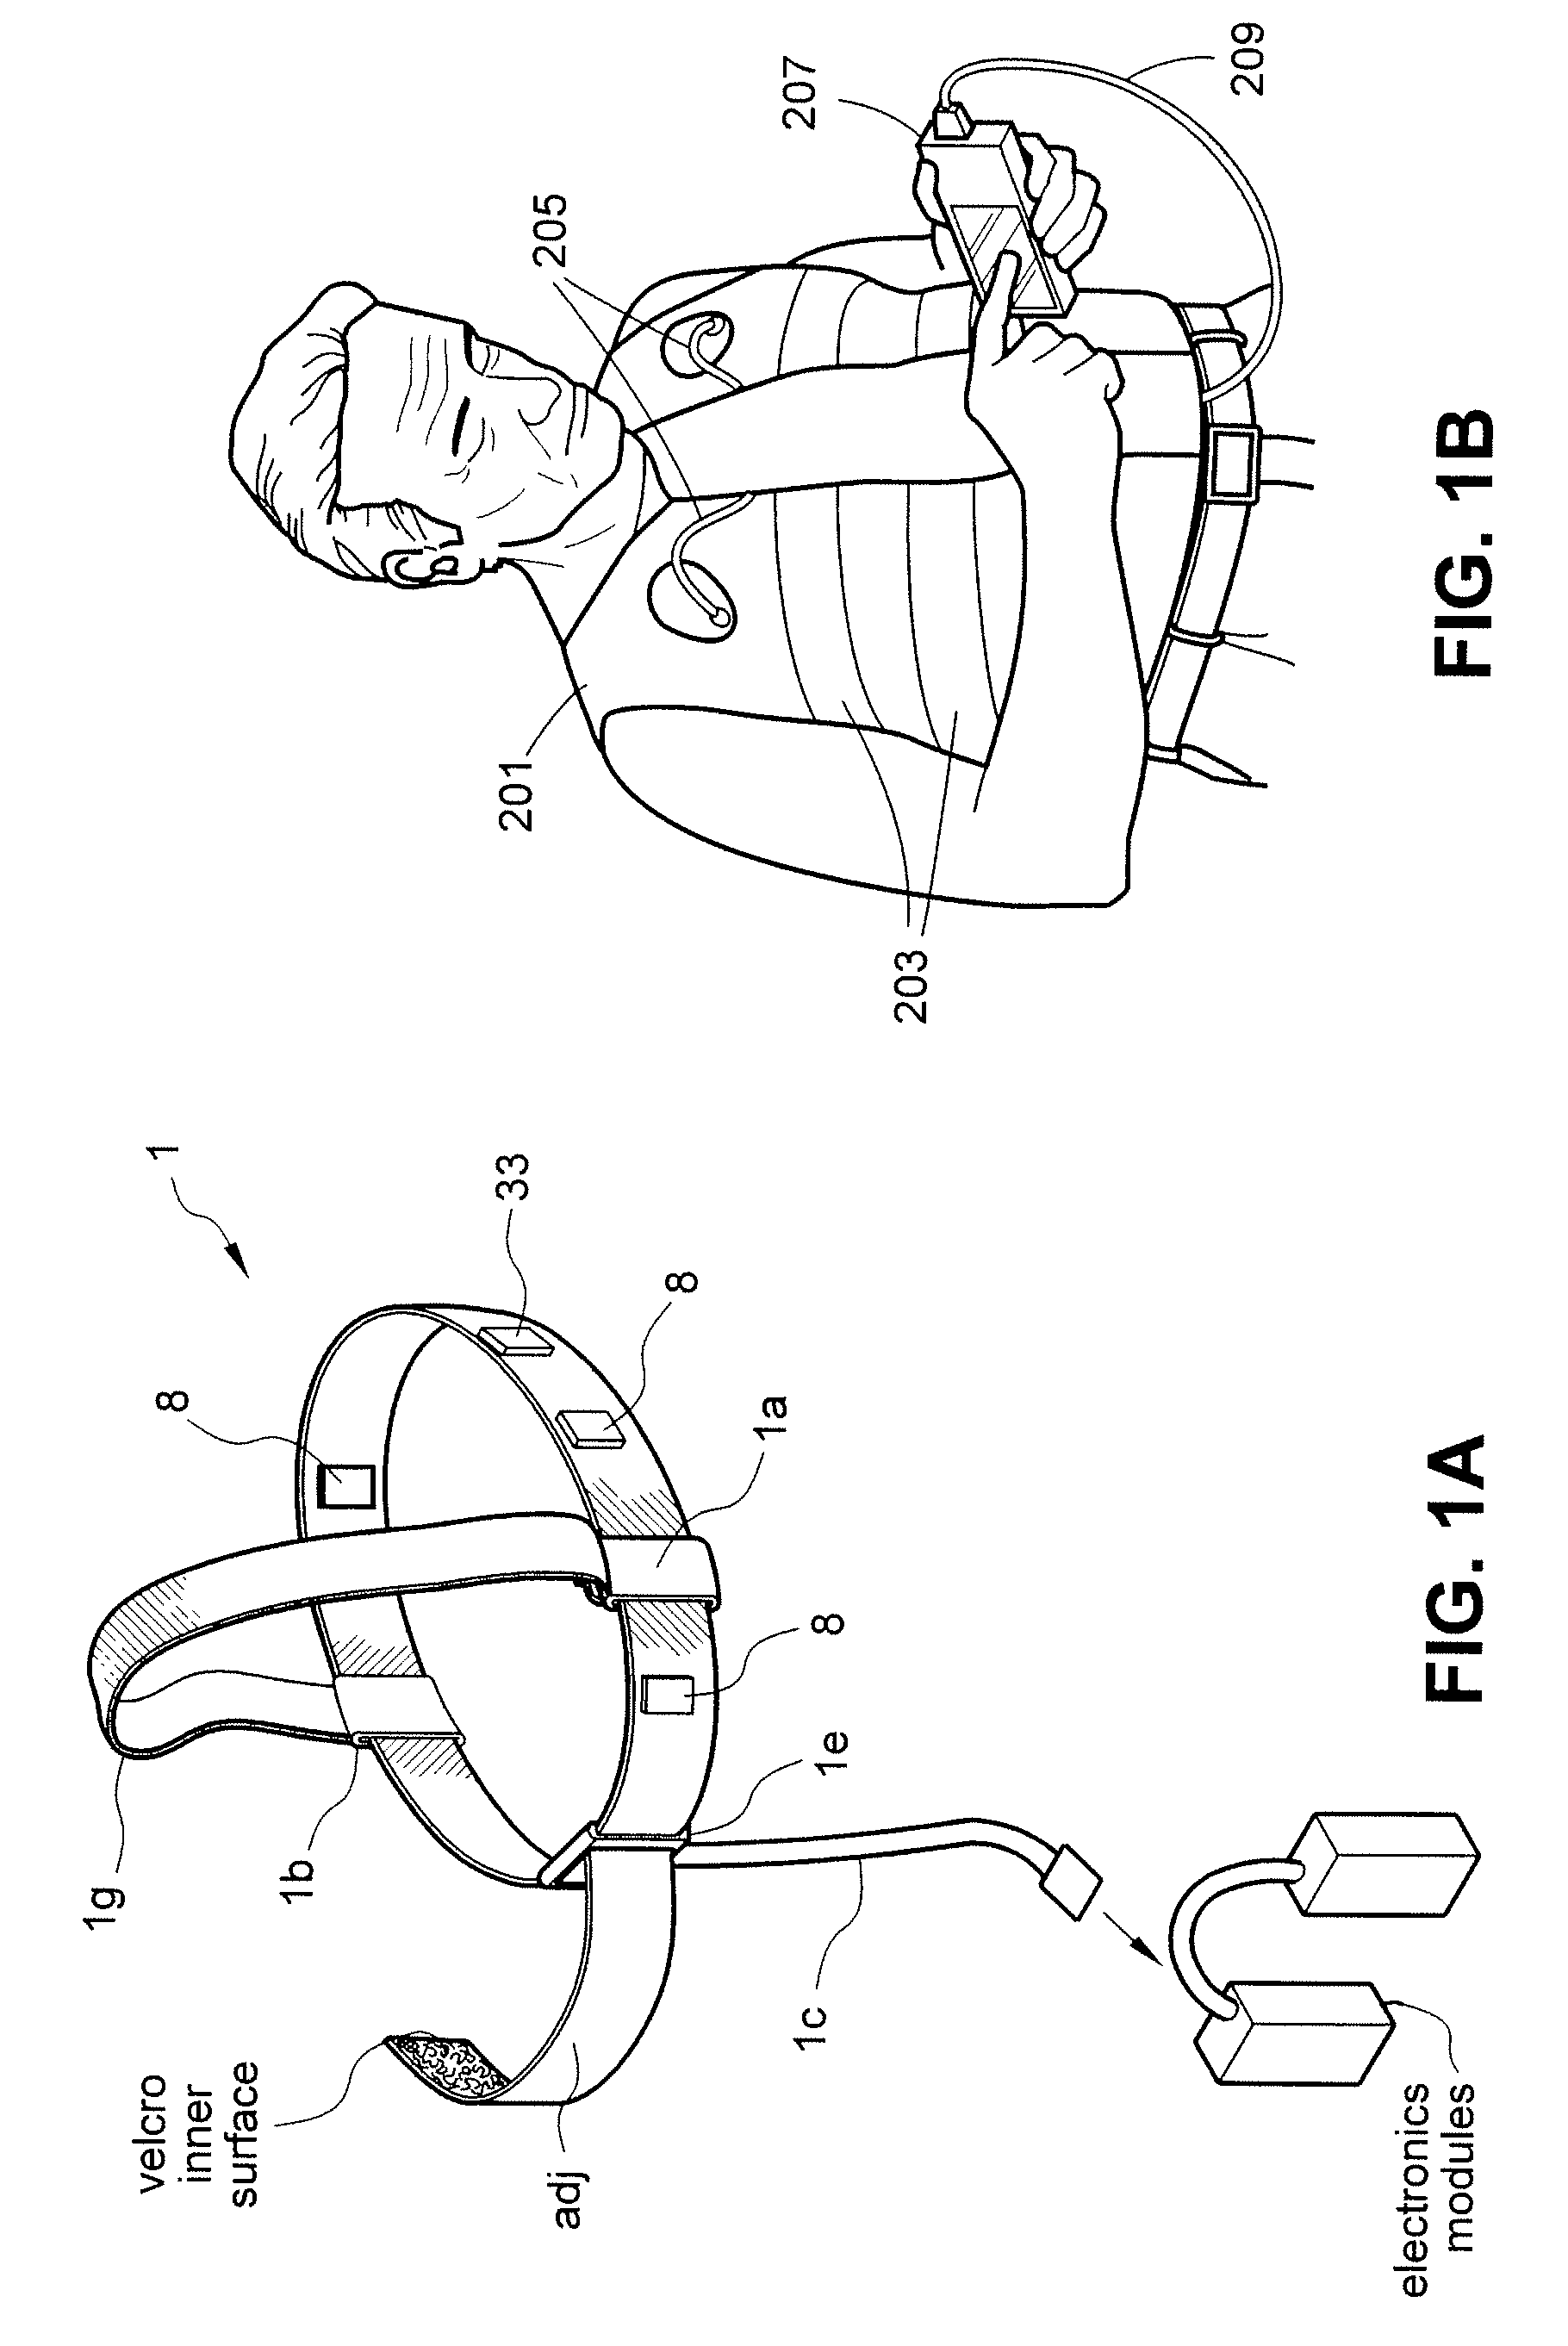 Method and system for extracting cardiac parameters from plethysmographic signals